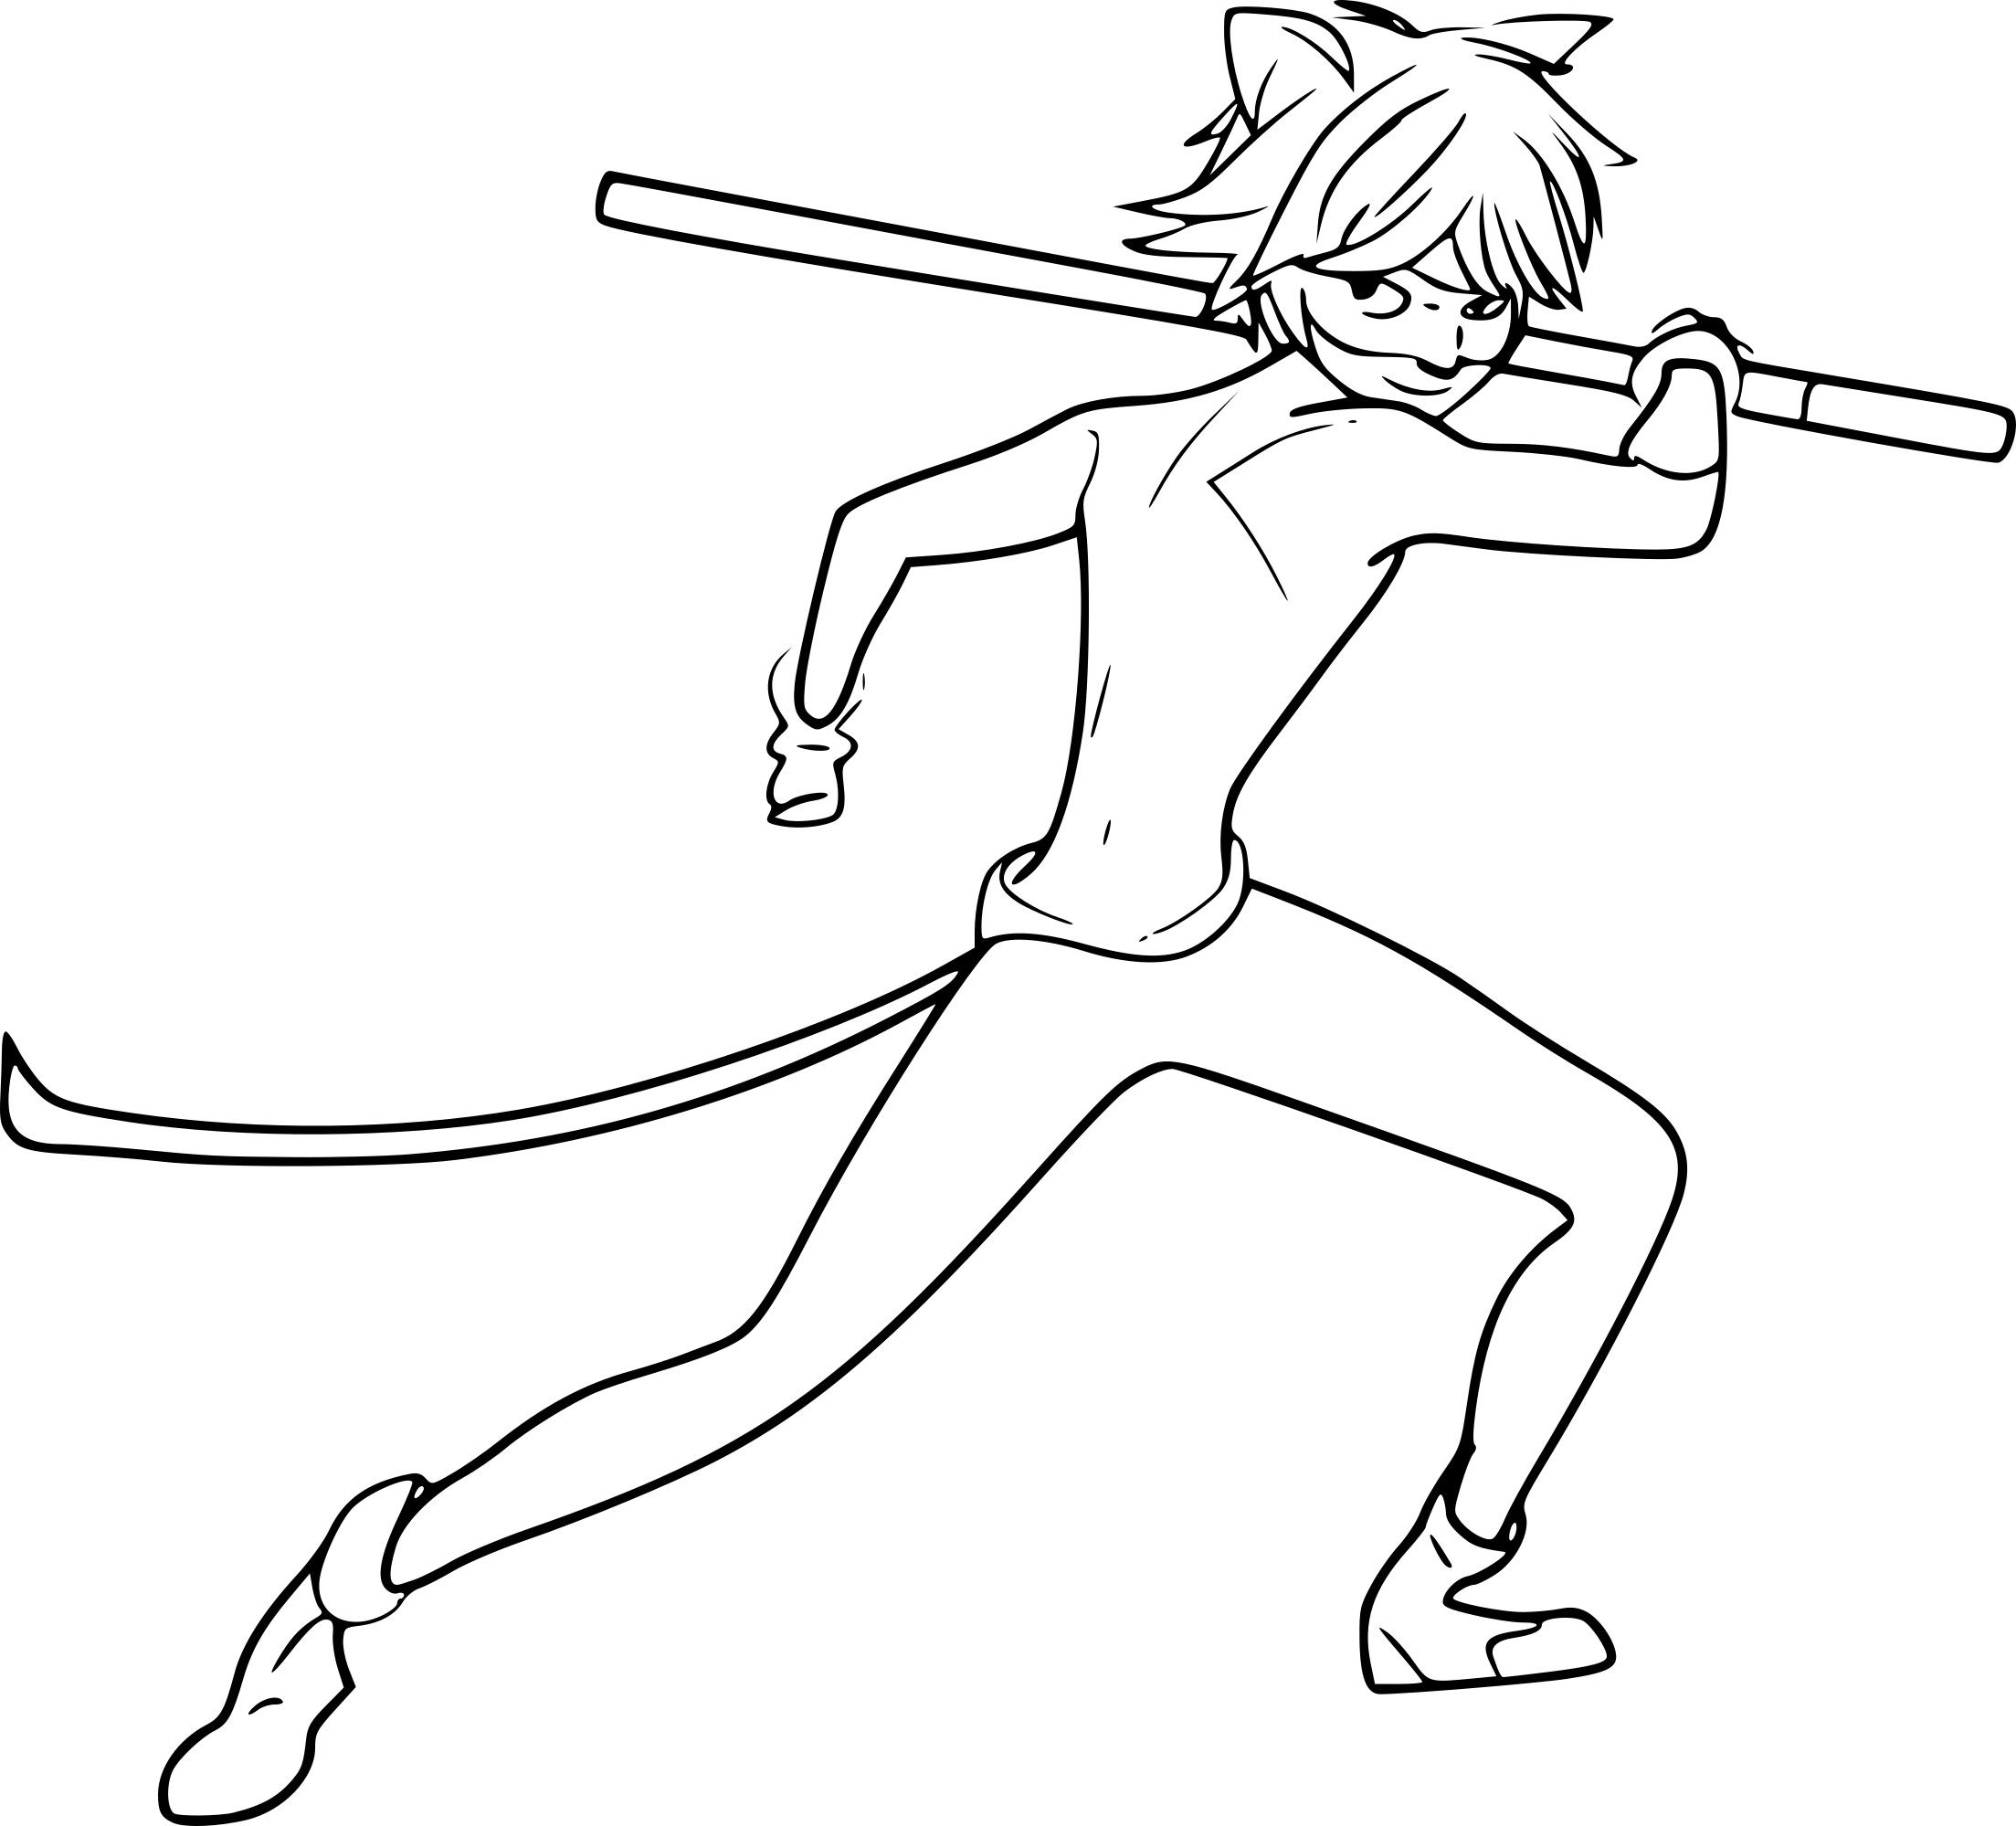 Miraculous Ladybug coloring page | Ladybug coloring page, Cute ...